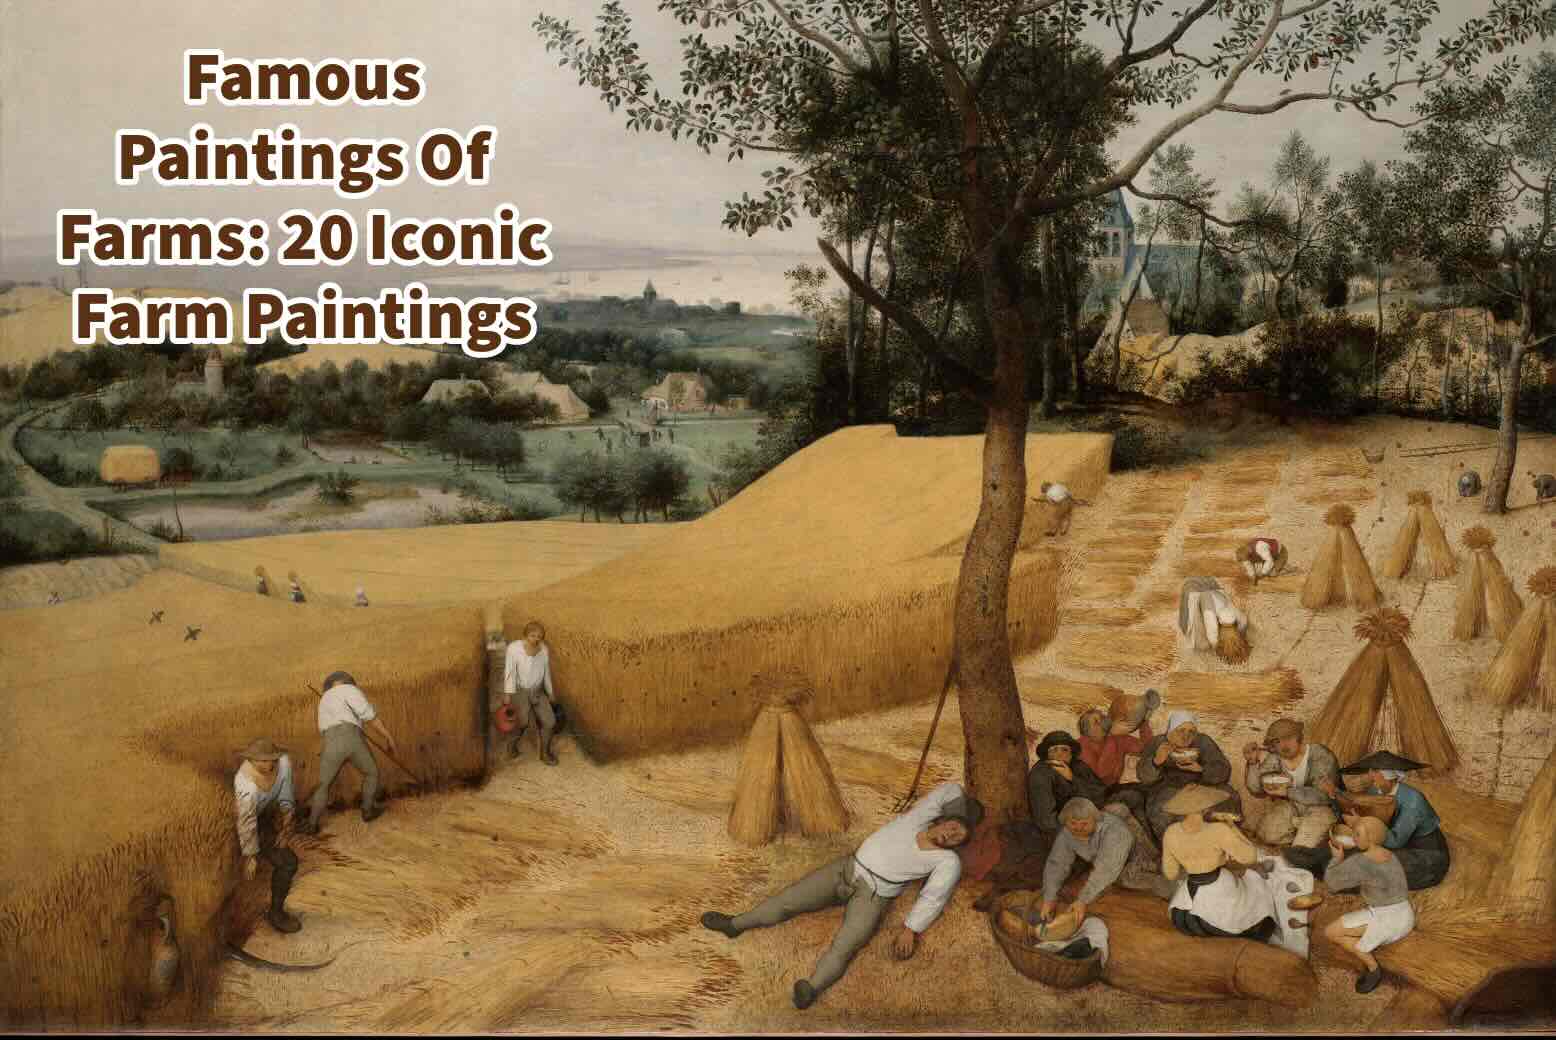 Famous Paintings Of Farms- 20 Iconic Farm Paintings